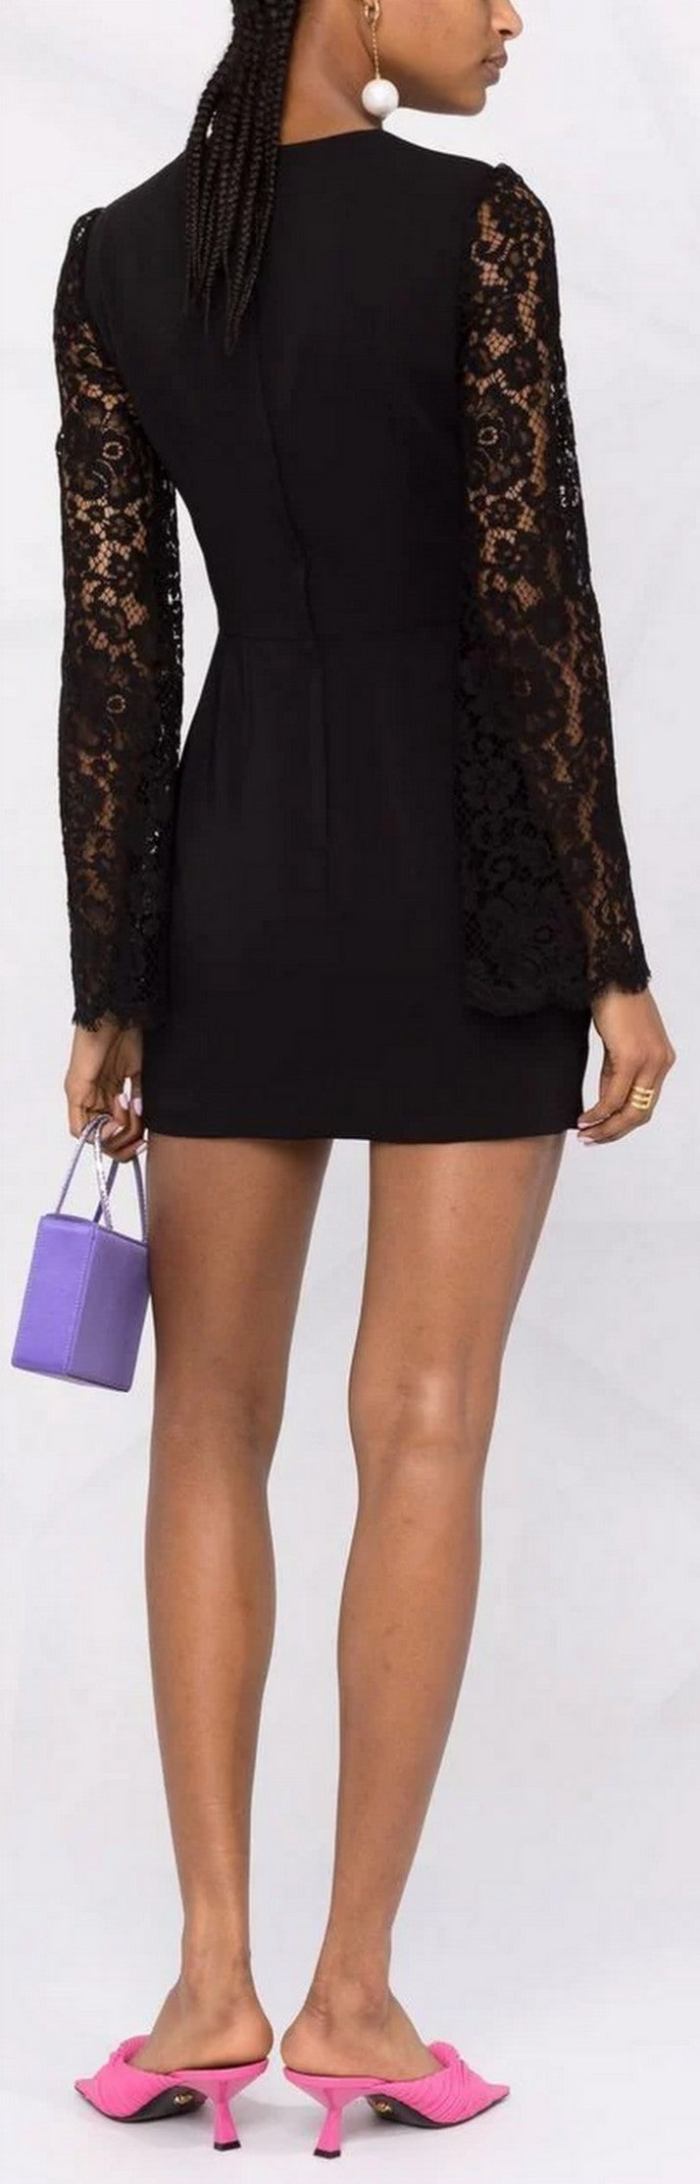 Black Mini Dress with Cordonetto Lace Sleeves Inspired Fashions Boutique